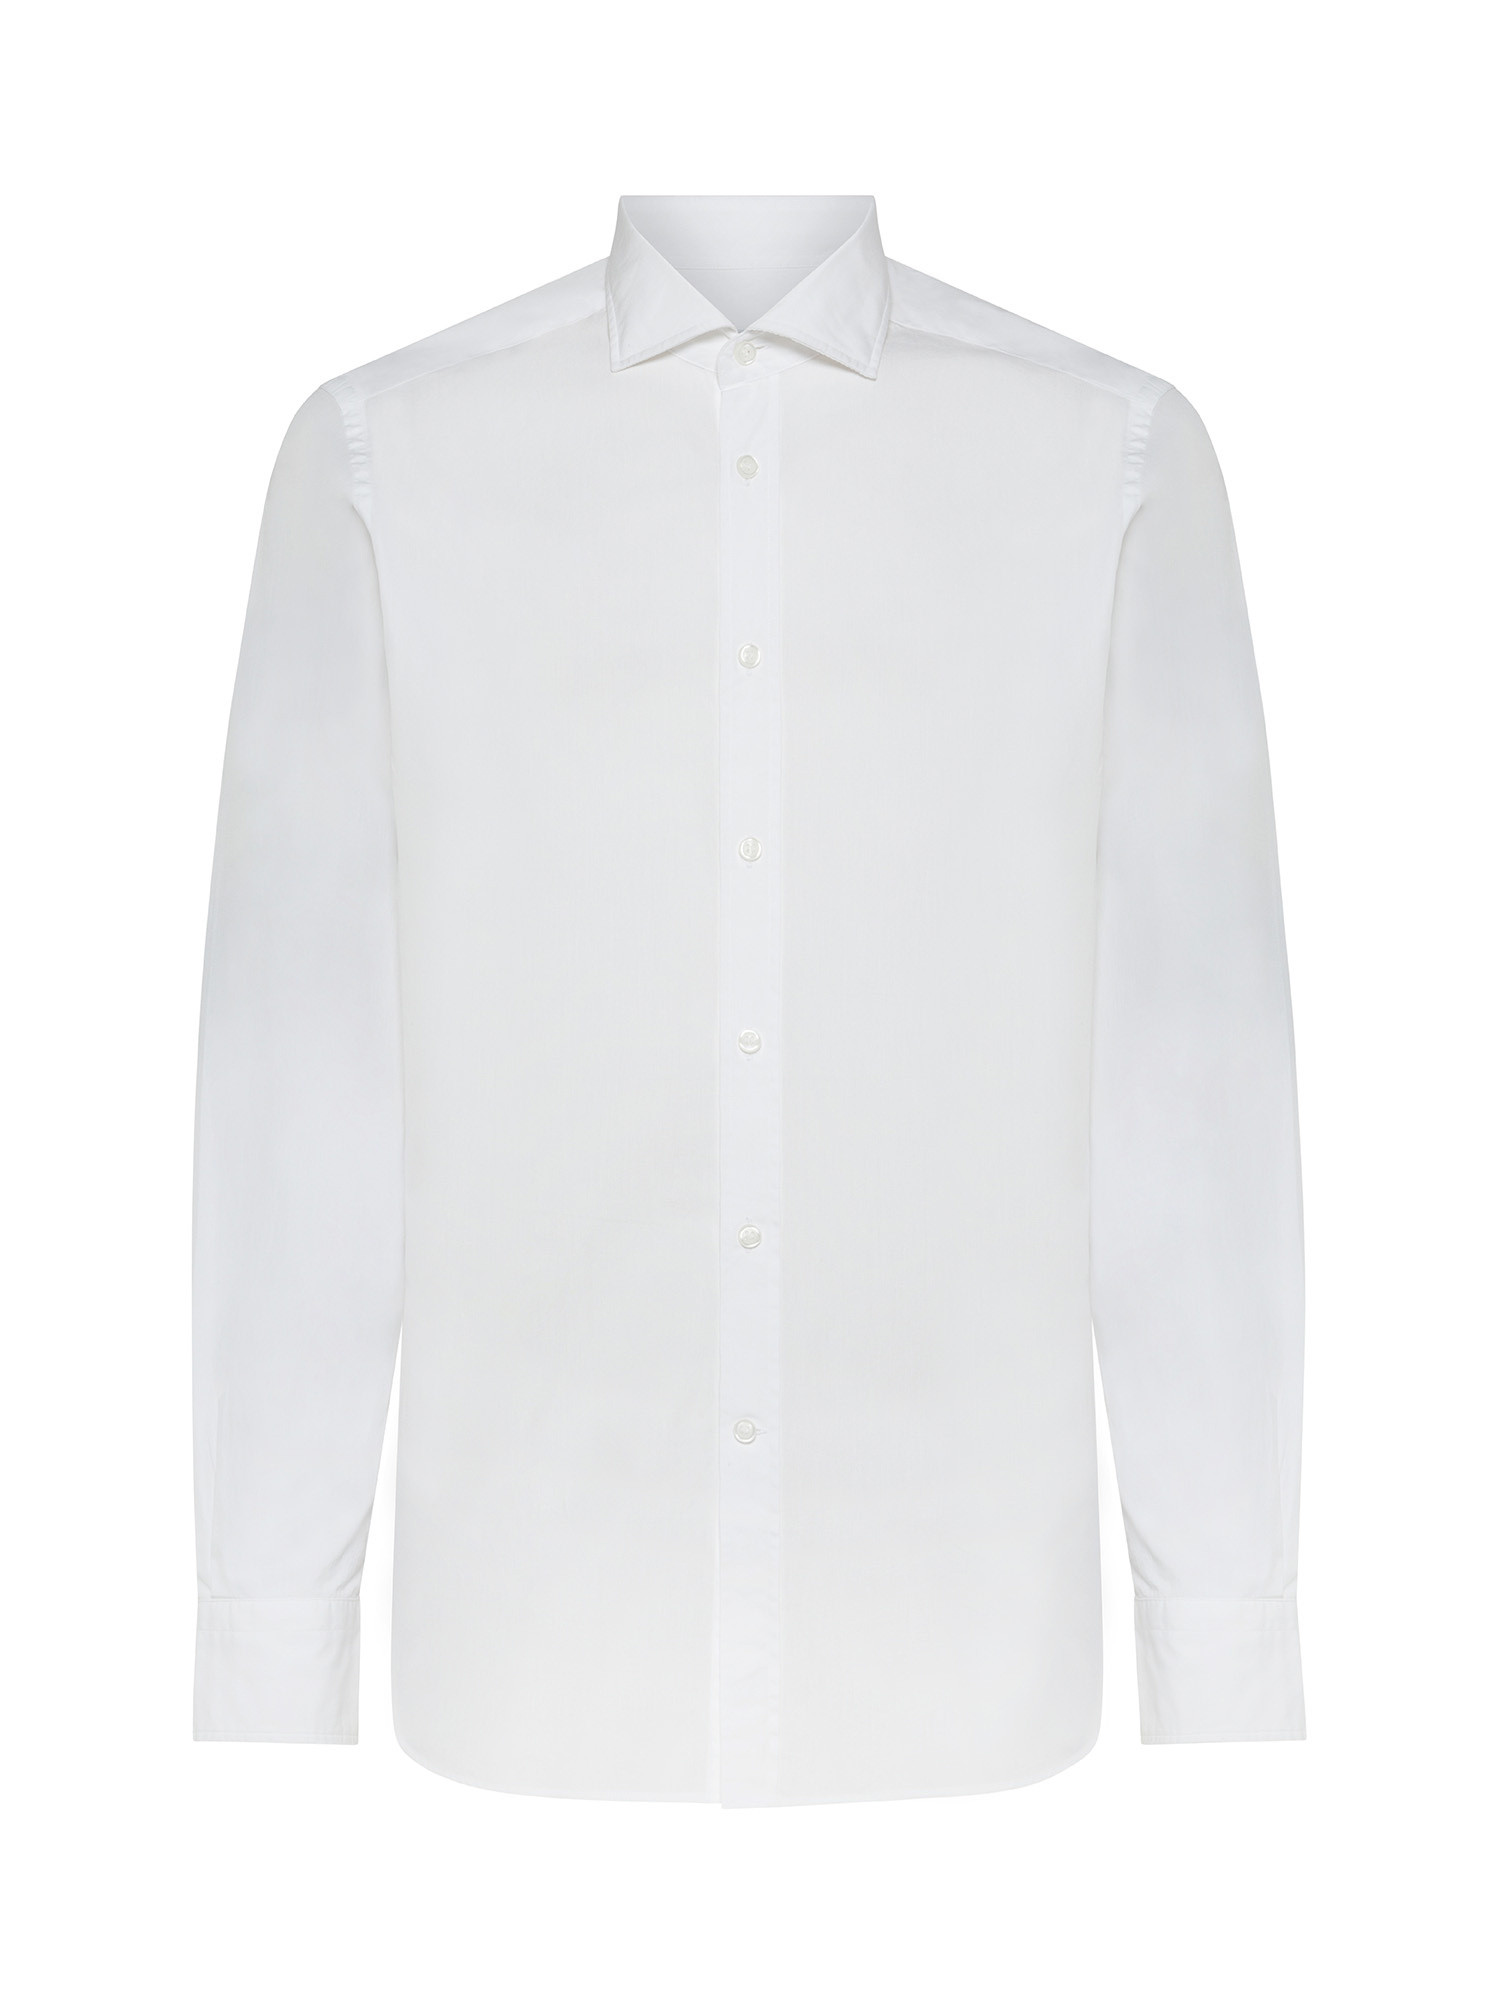 Luca D'Altieri - Slim fit shirt in pure cotton, White, large image number 0